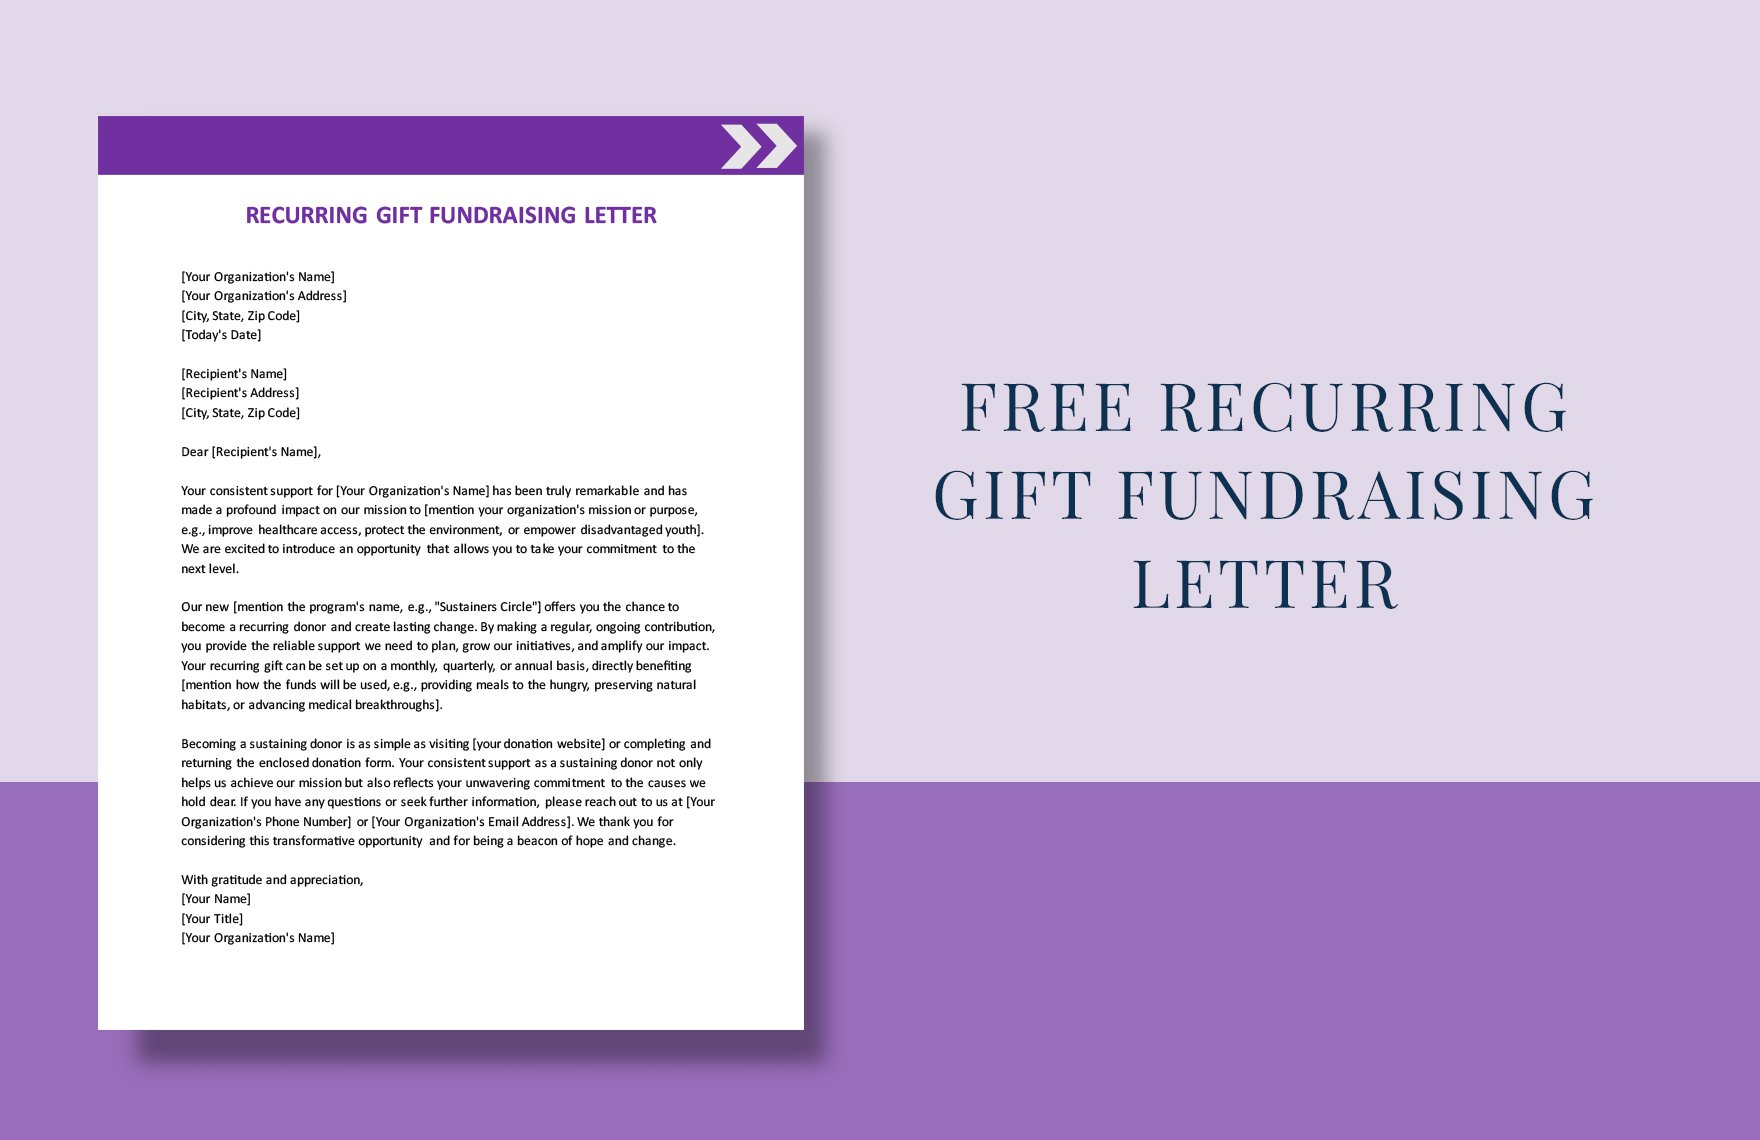 What Is A Gift Letter And How Do You Use It? | Quicken Loans